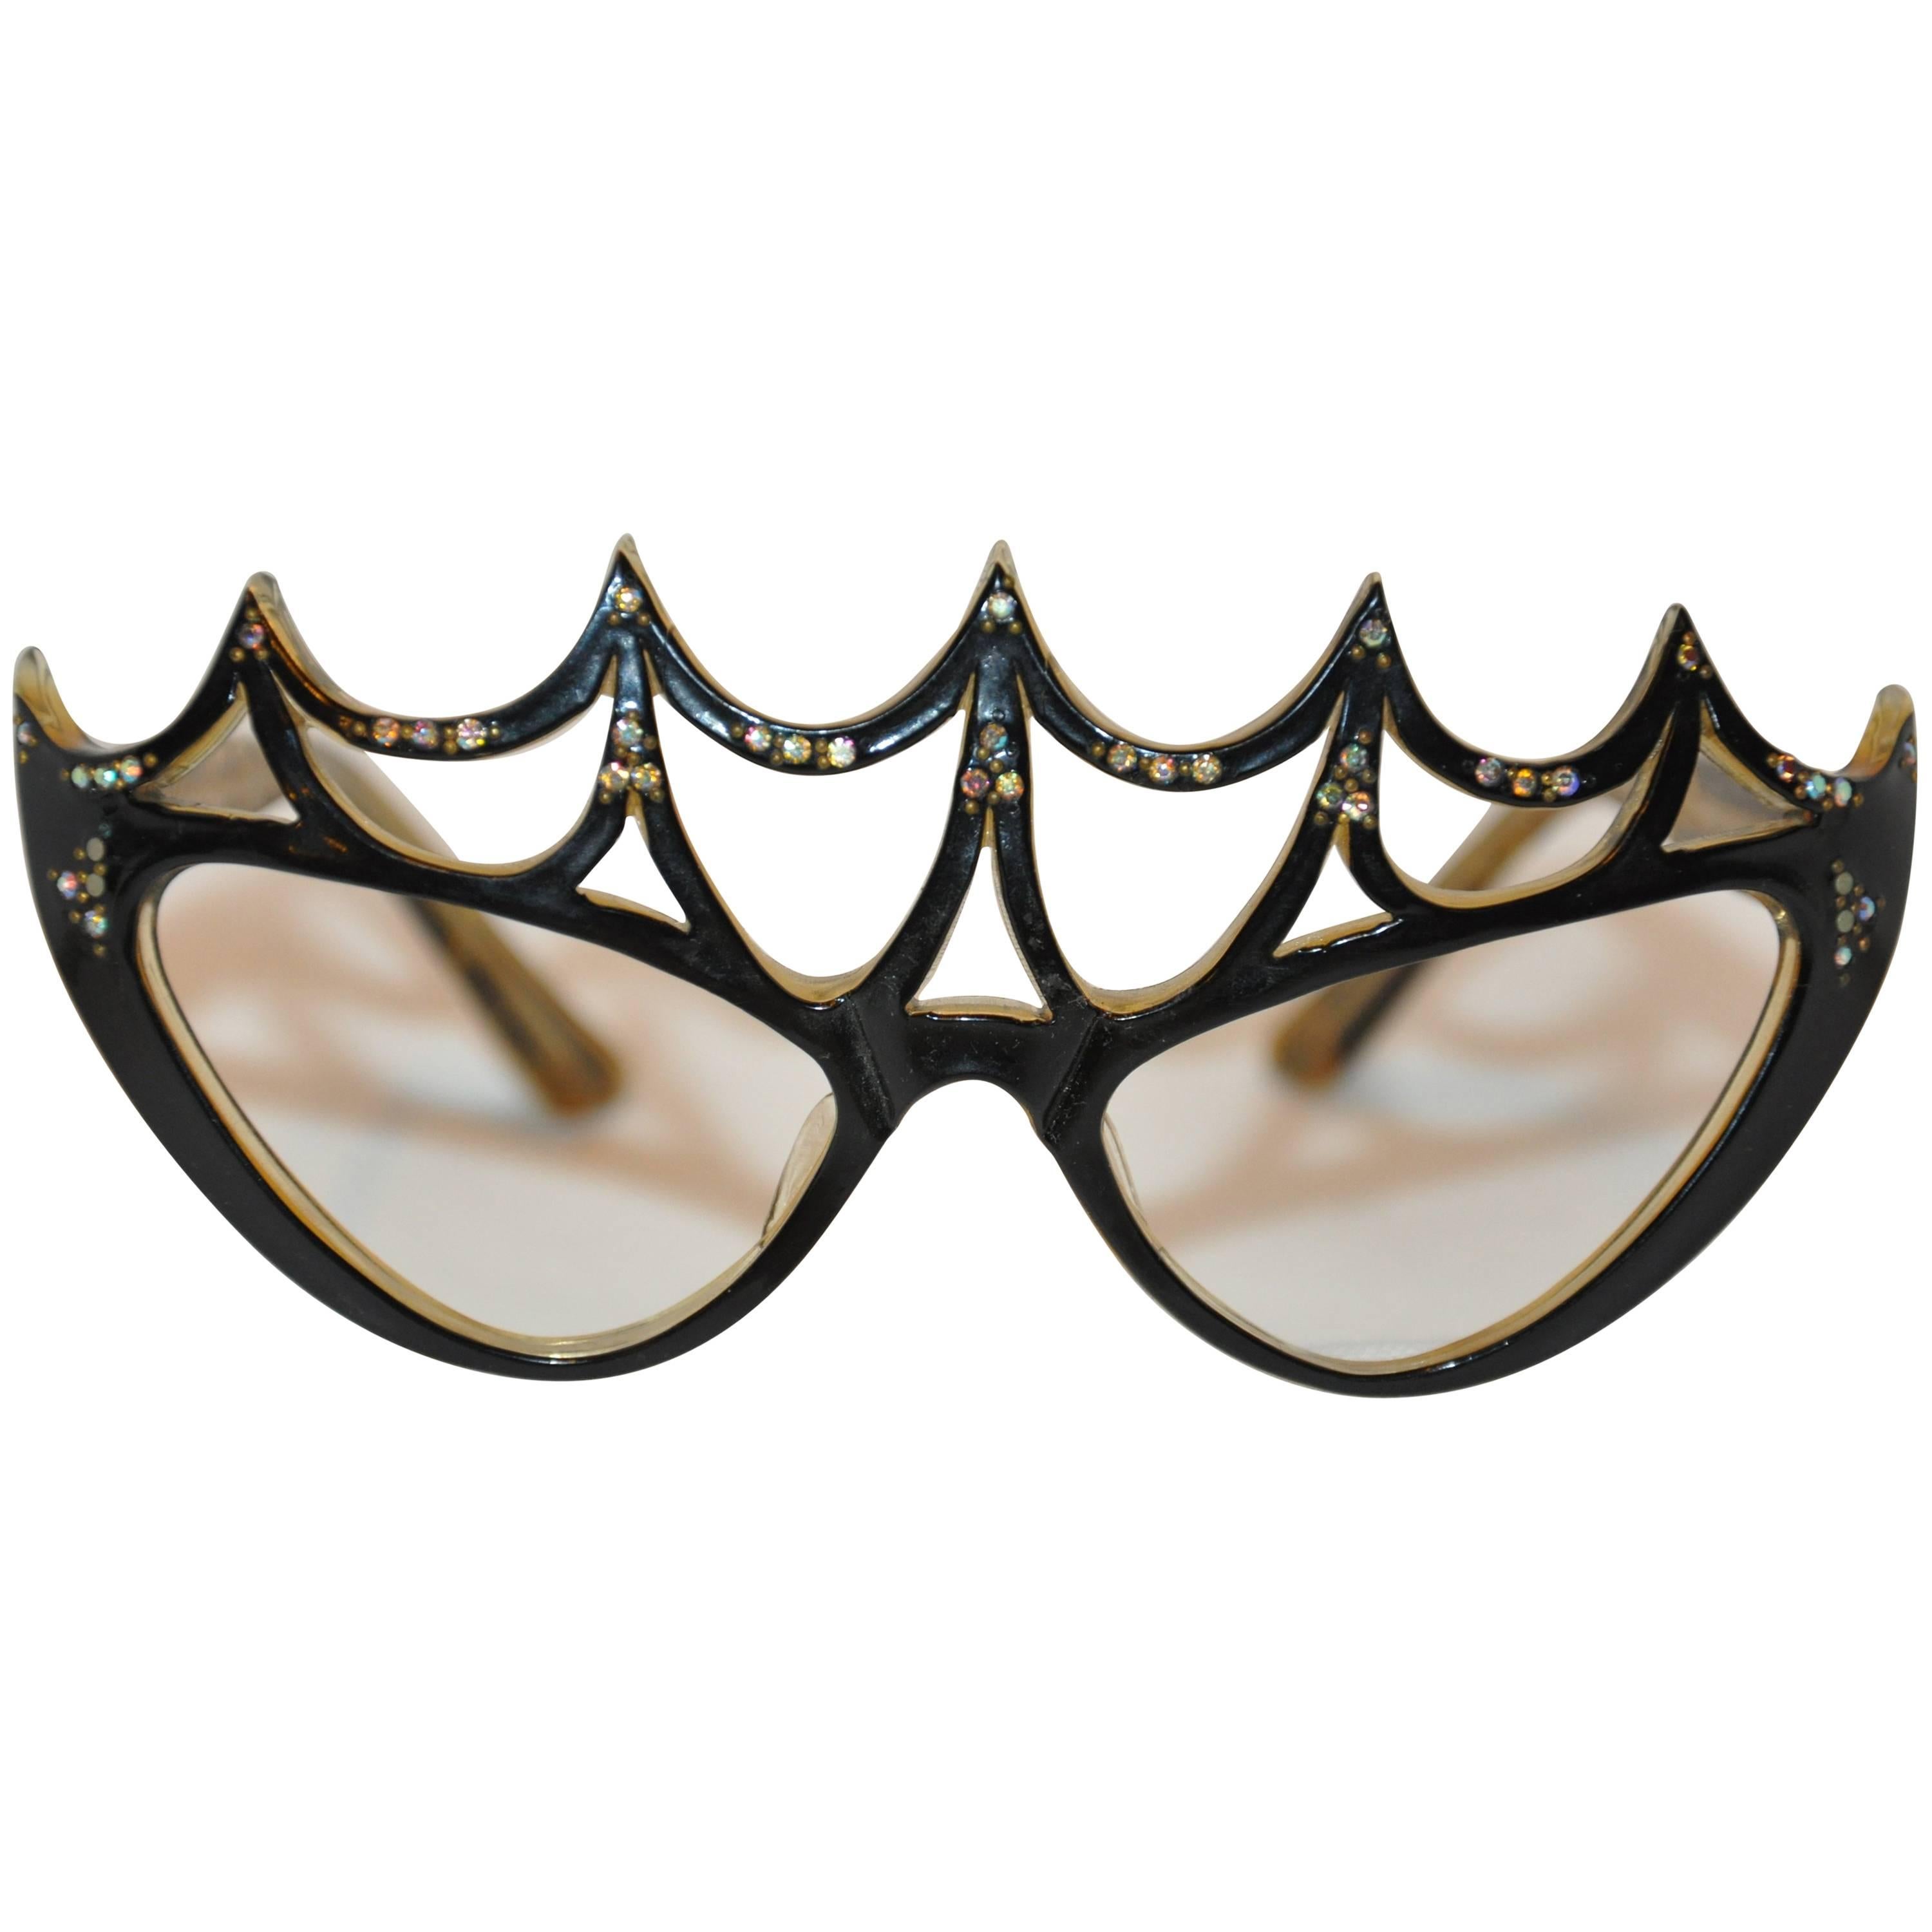 Vintage One-Of-A-Kind "Peggy Guggenheim" Style Masquerade Frames